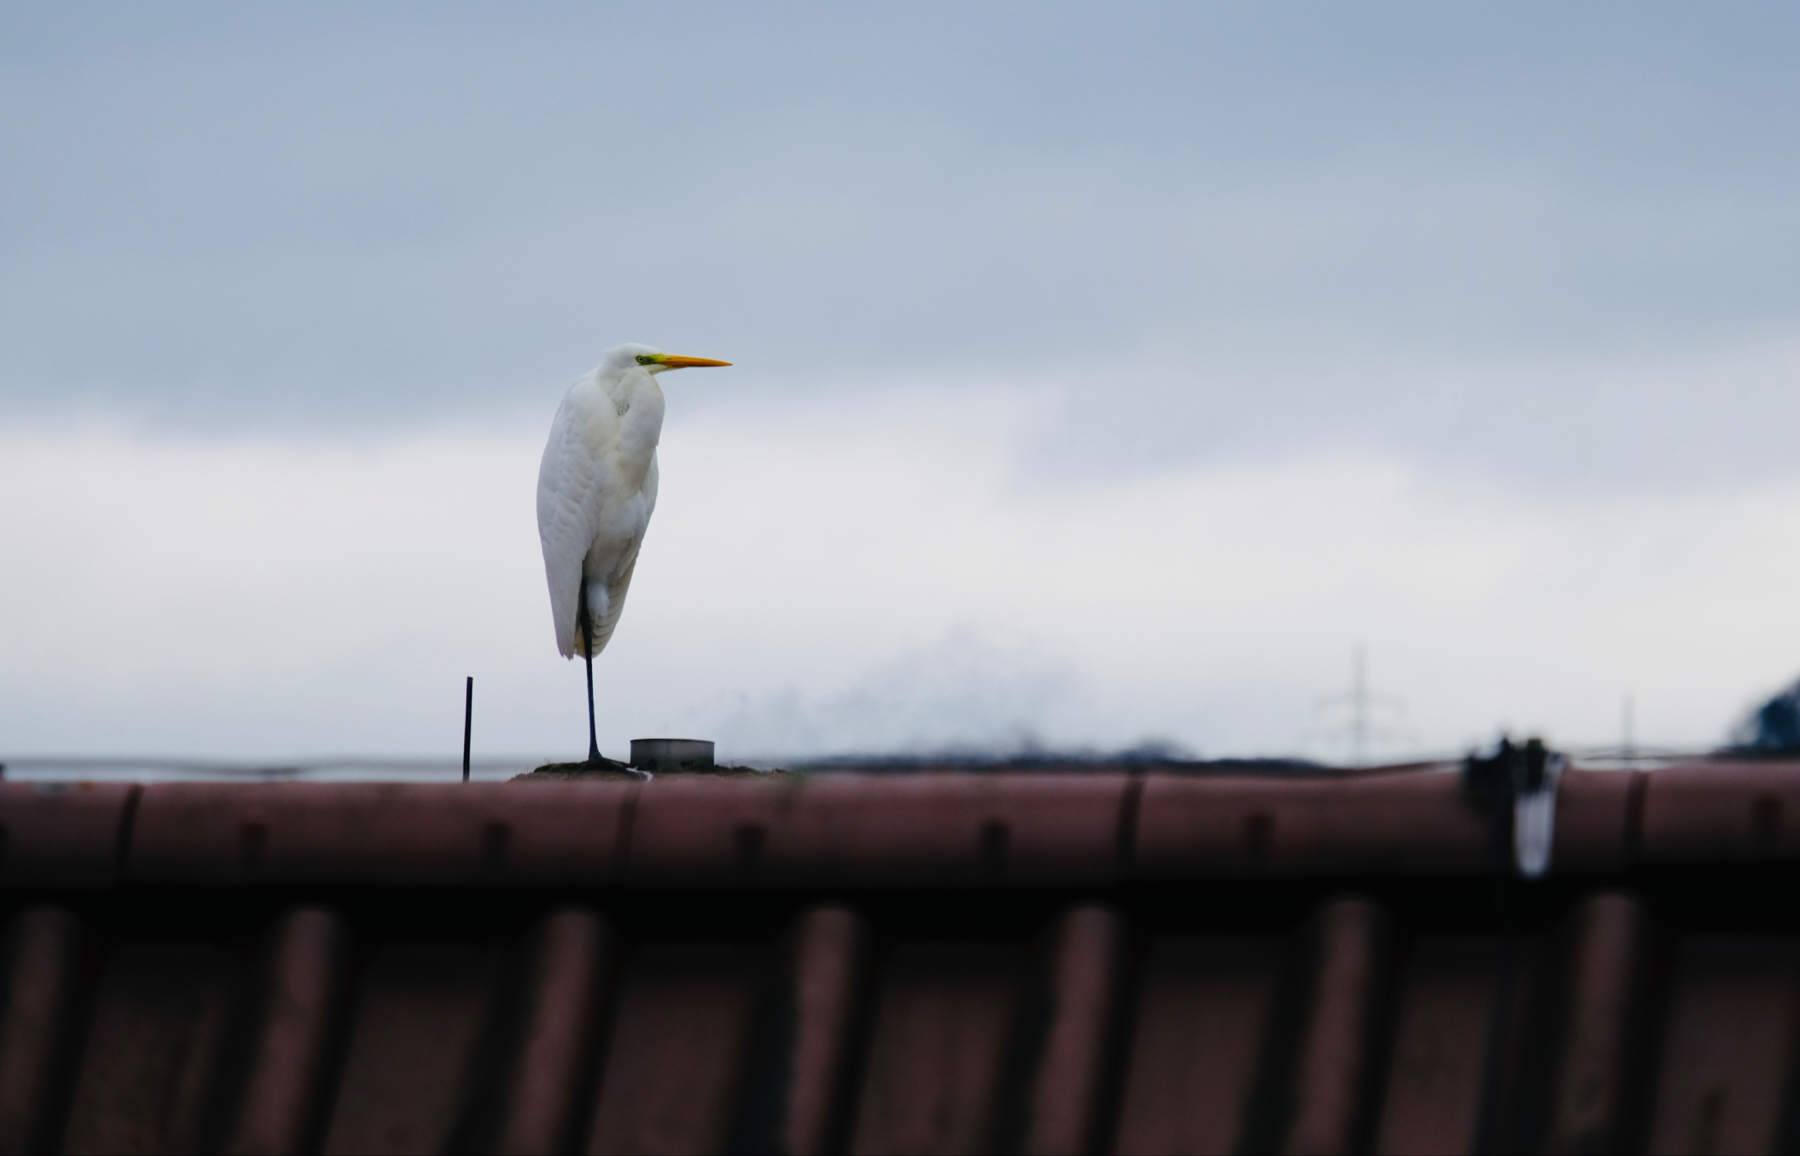 Great White Egret on a rooftop